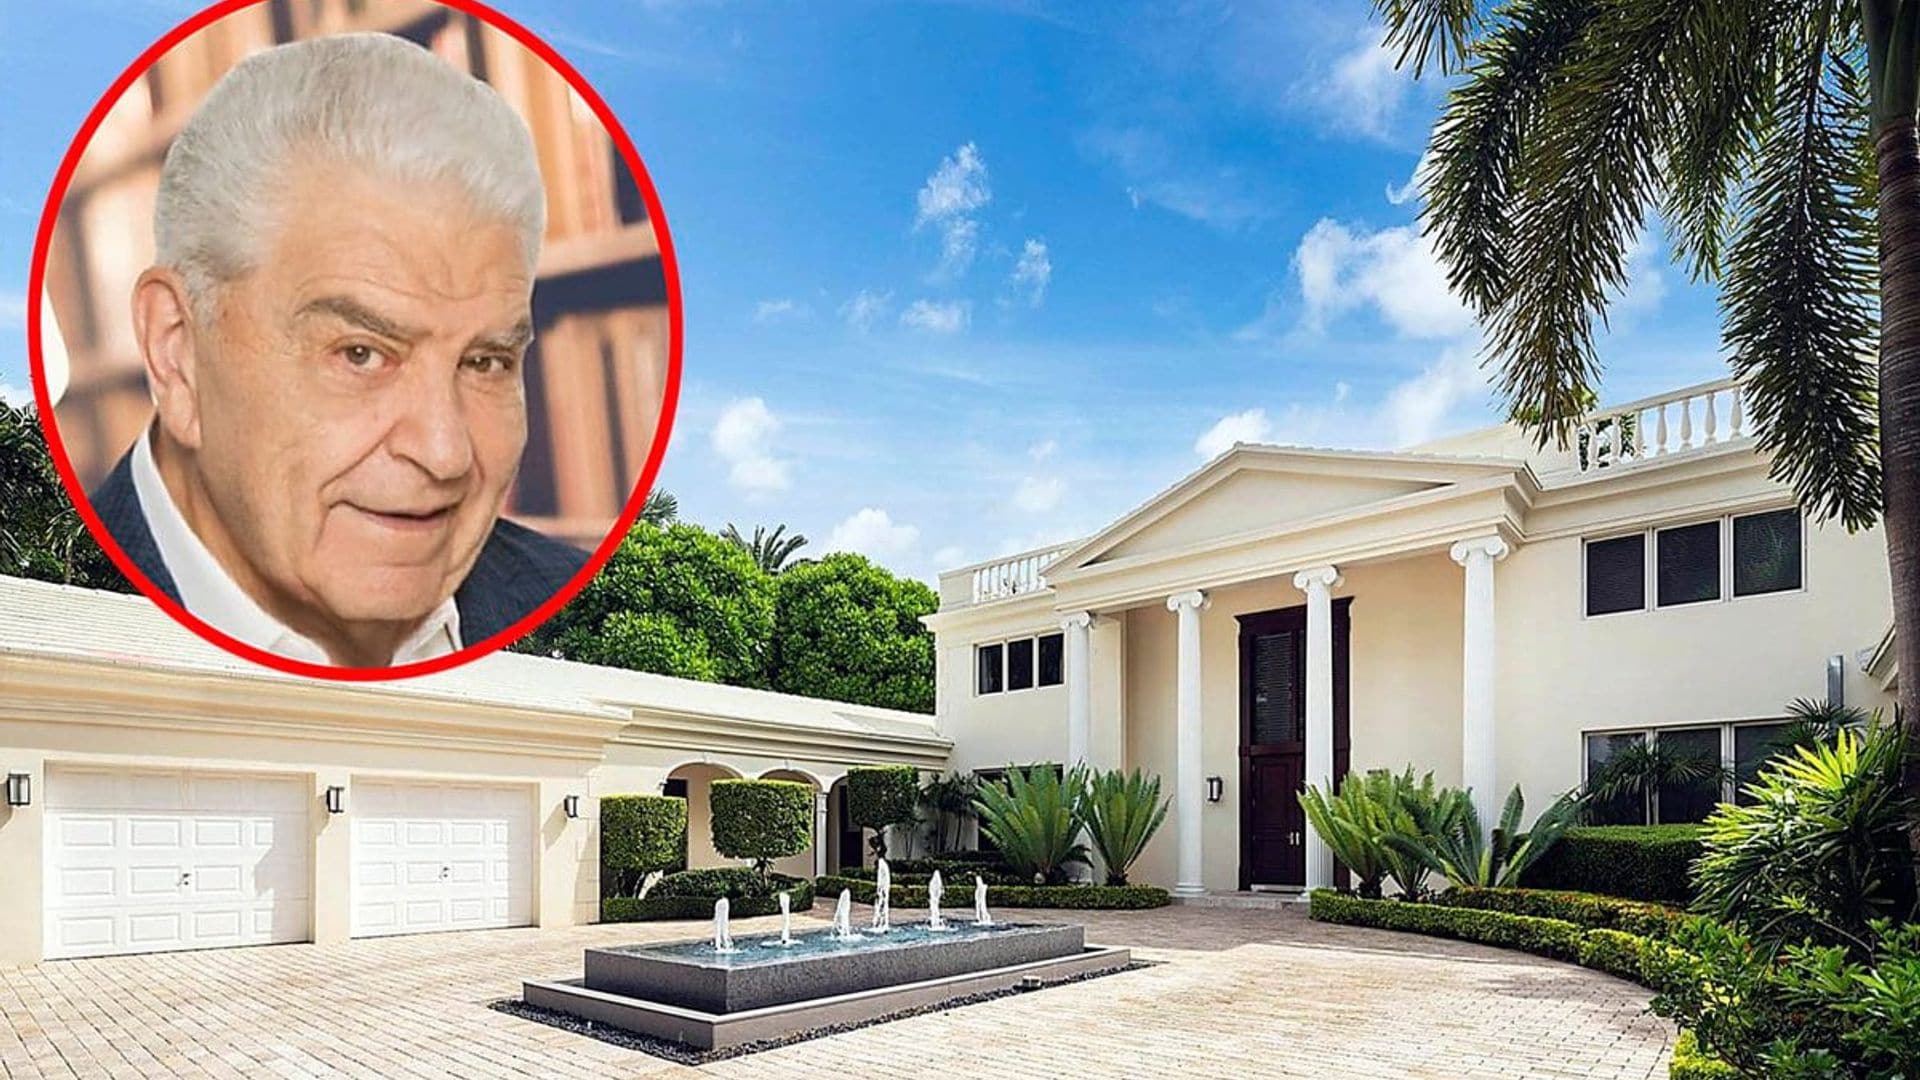 Don Francisco secures over a million dollars over the asking price after selling his Miami mansion